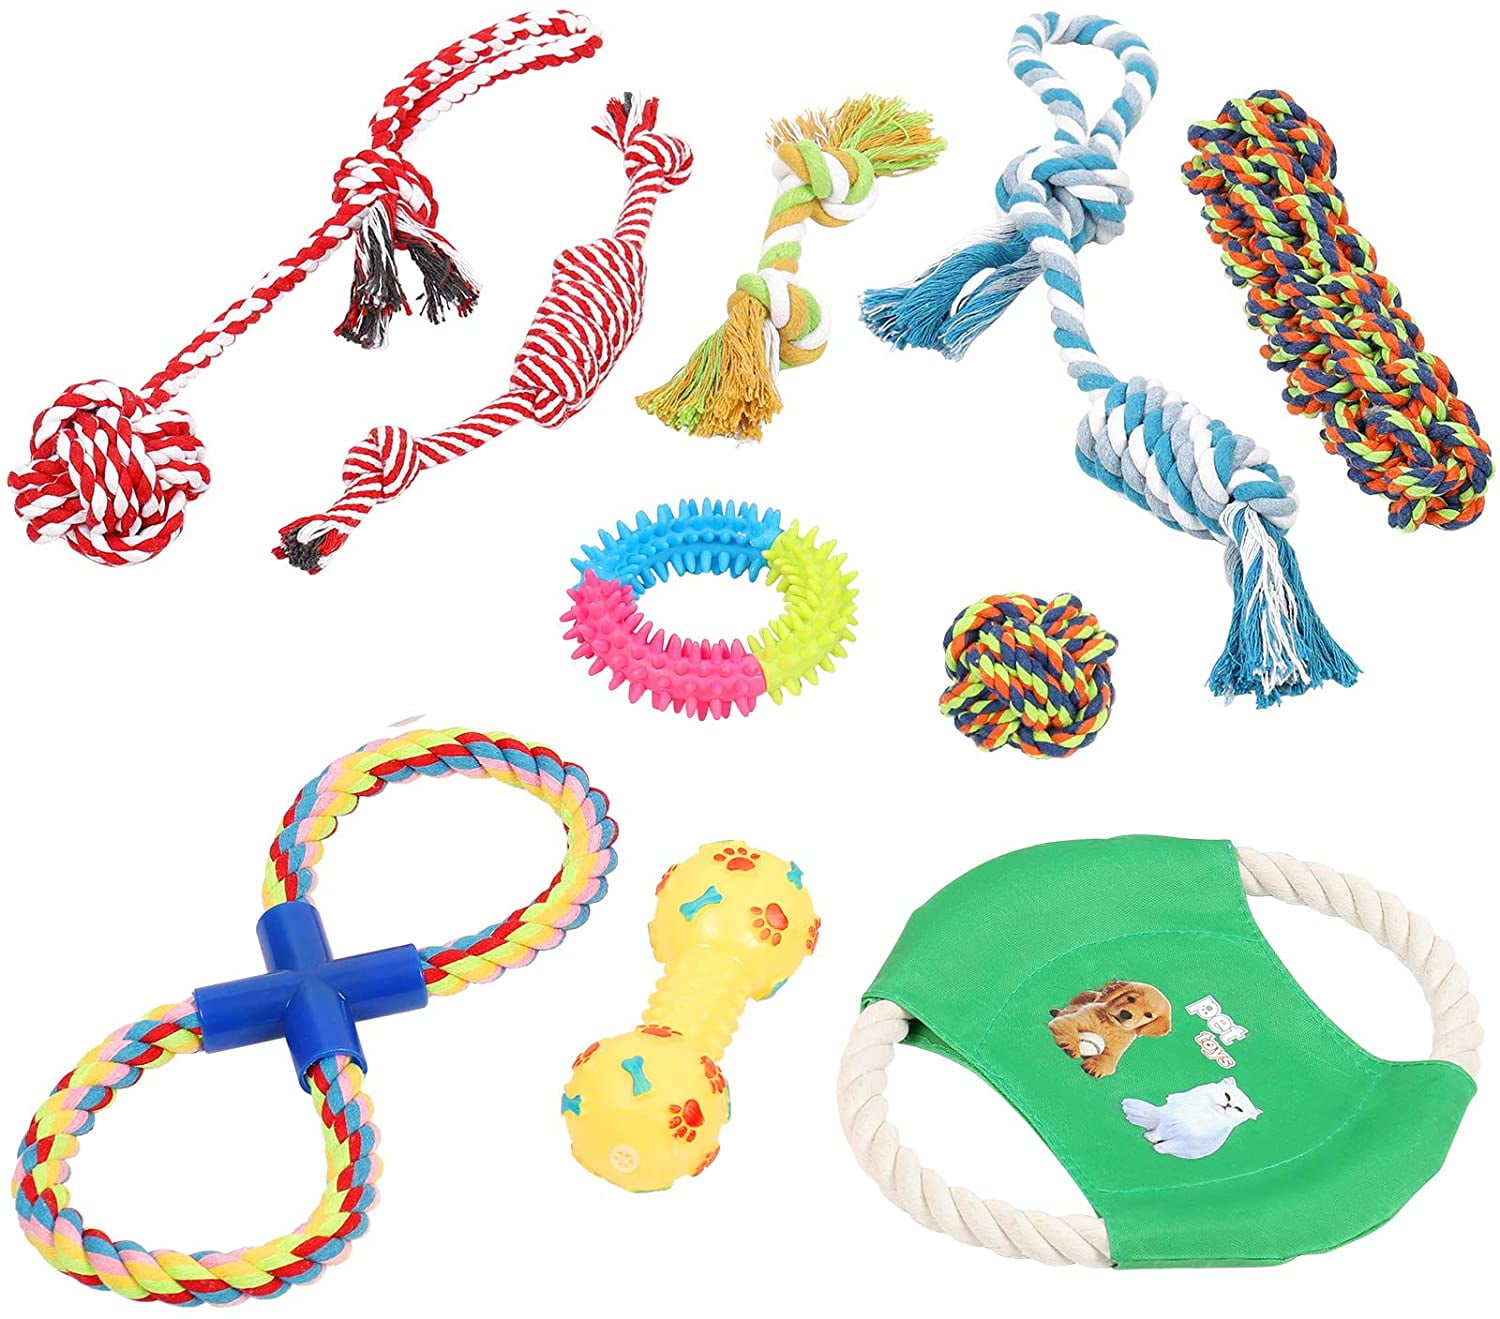 Dog Chew Toys Set with Cotton Rope for Puppies and Small Dogs PEUPET Puppy Teething Toys 